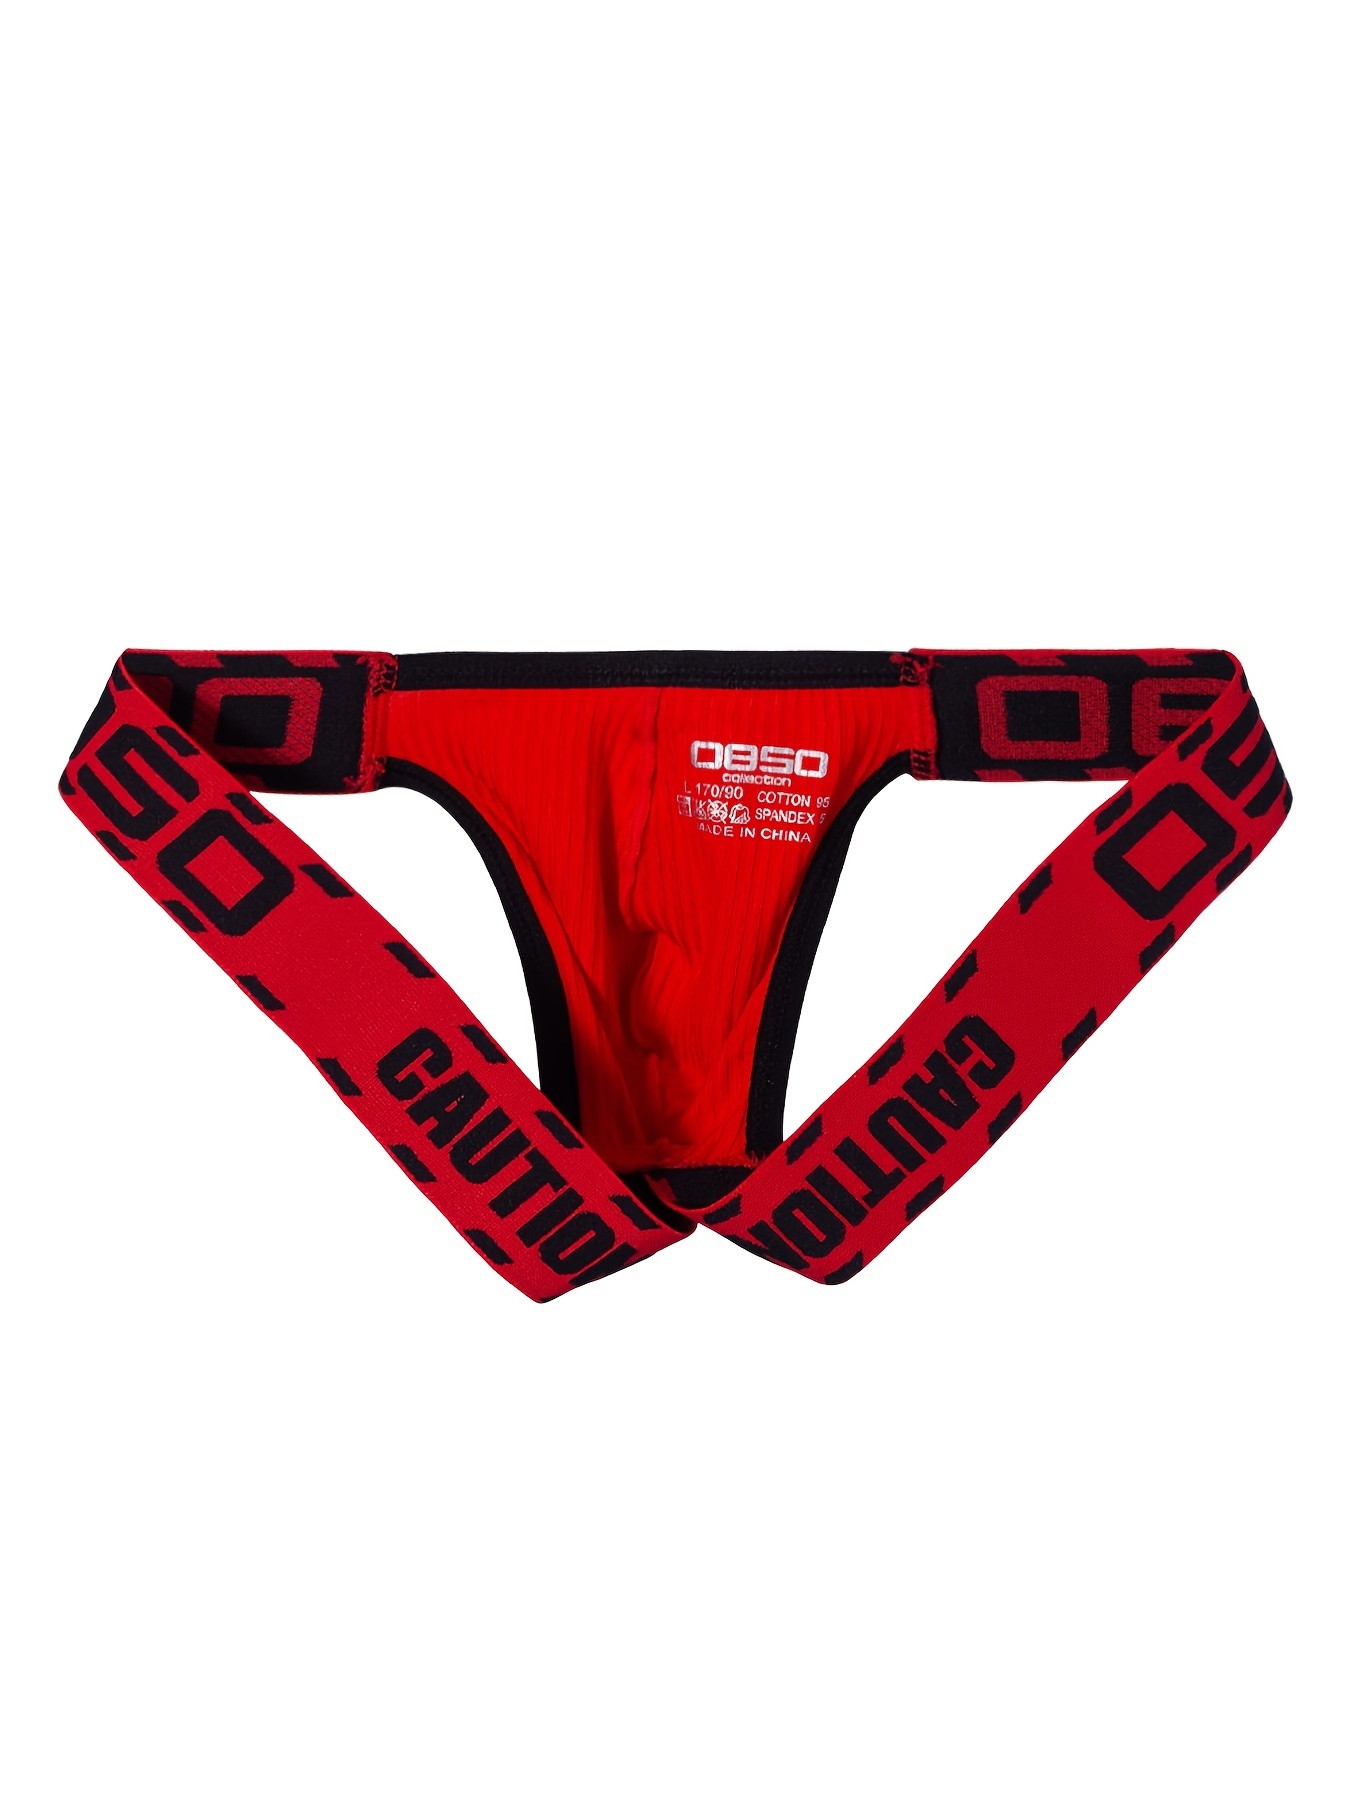 Xtrim Gym Supporter for Men, Stretchable Cotton Sports Underwear, Men's Briefs  Supporter - Buy Xtrim Gym Supporter for Men, Stretchable Cotton Sports  Underwear, Men's Briefs Supporter Online at Best Prices in India 